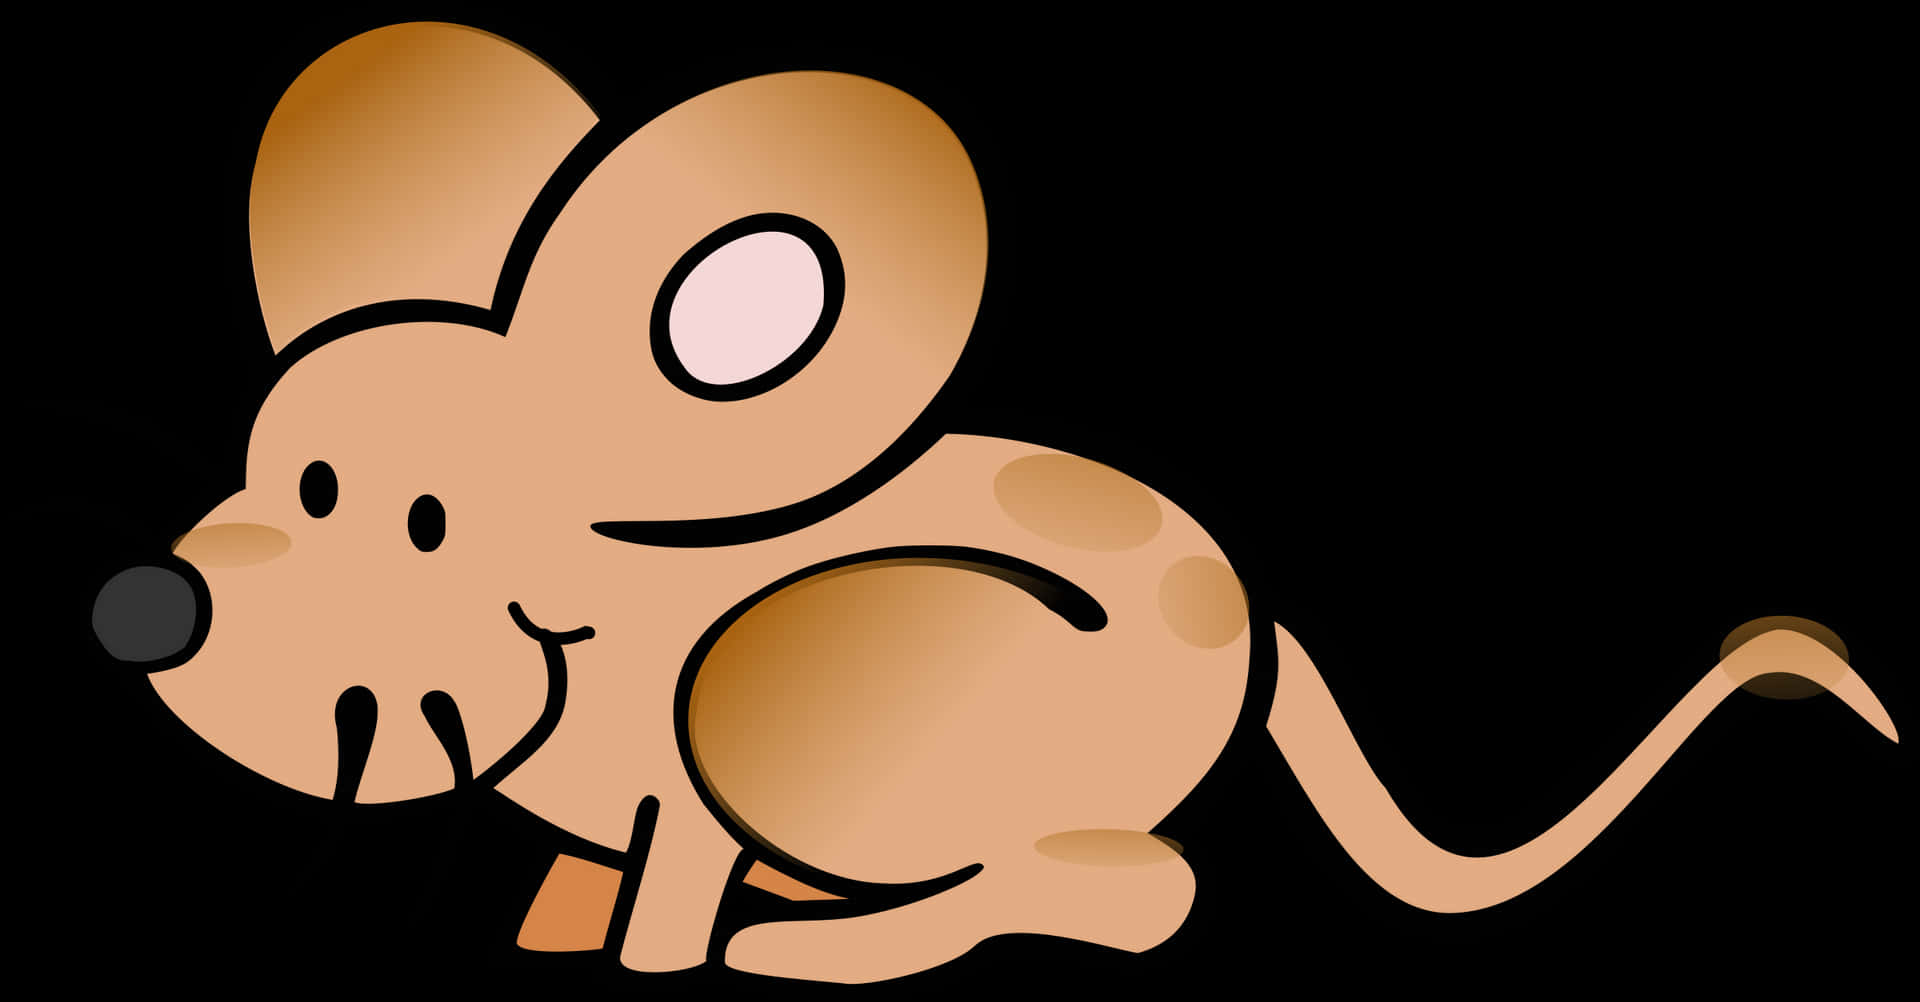 Cartoon Mouse Illustration PNG